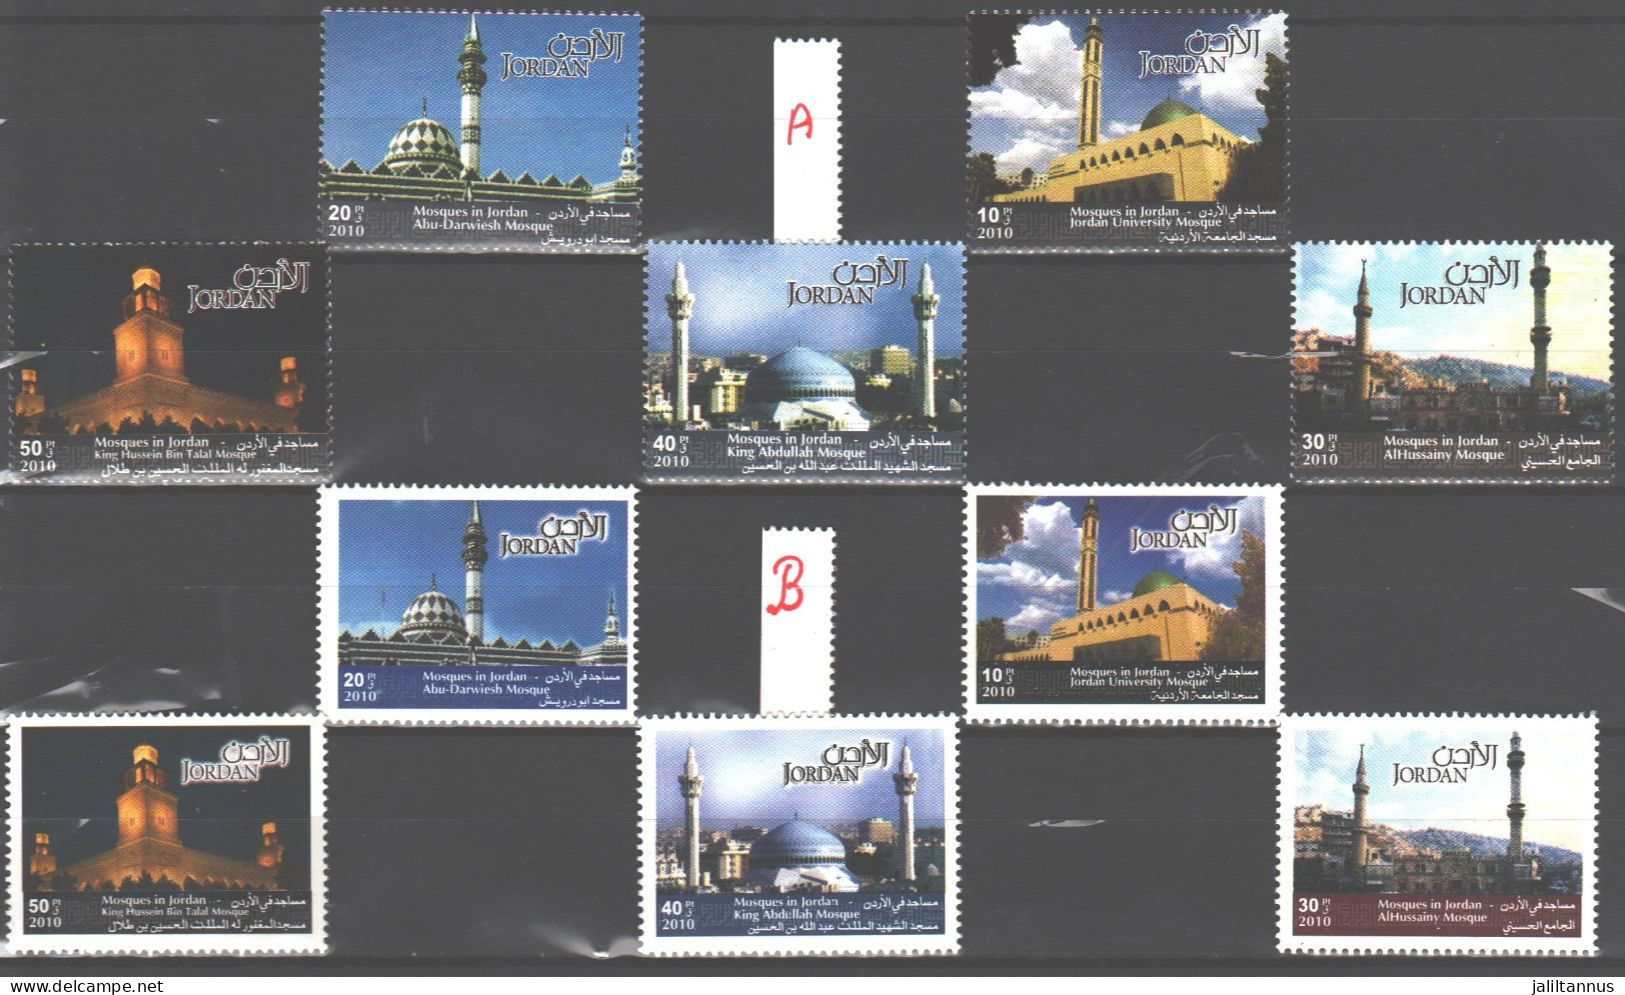 Jordan - Set 2010 Mosque Group A Common + Group B Not In Circulation Error There Is A White Frame - Jordan